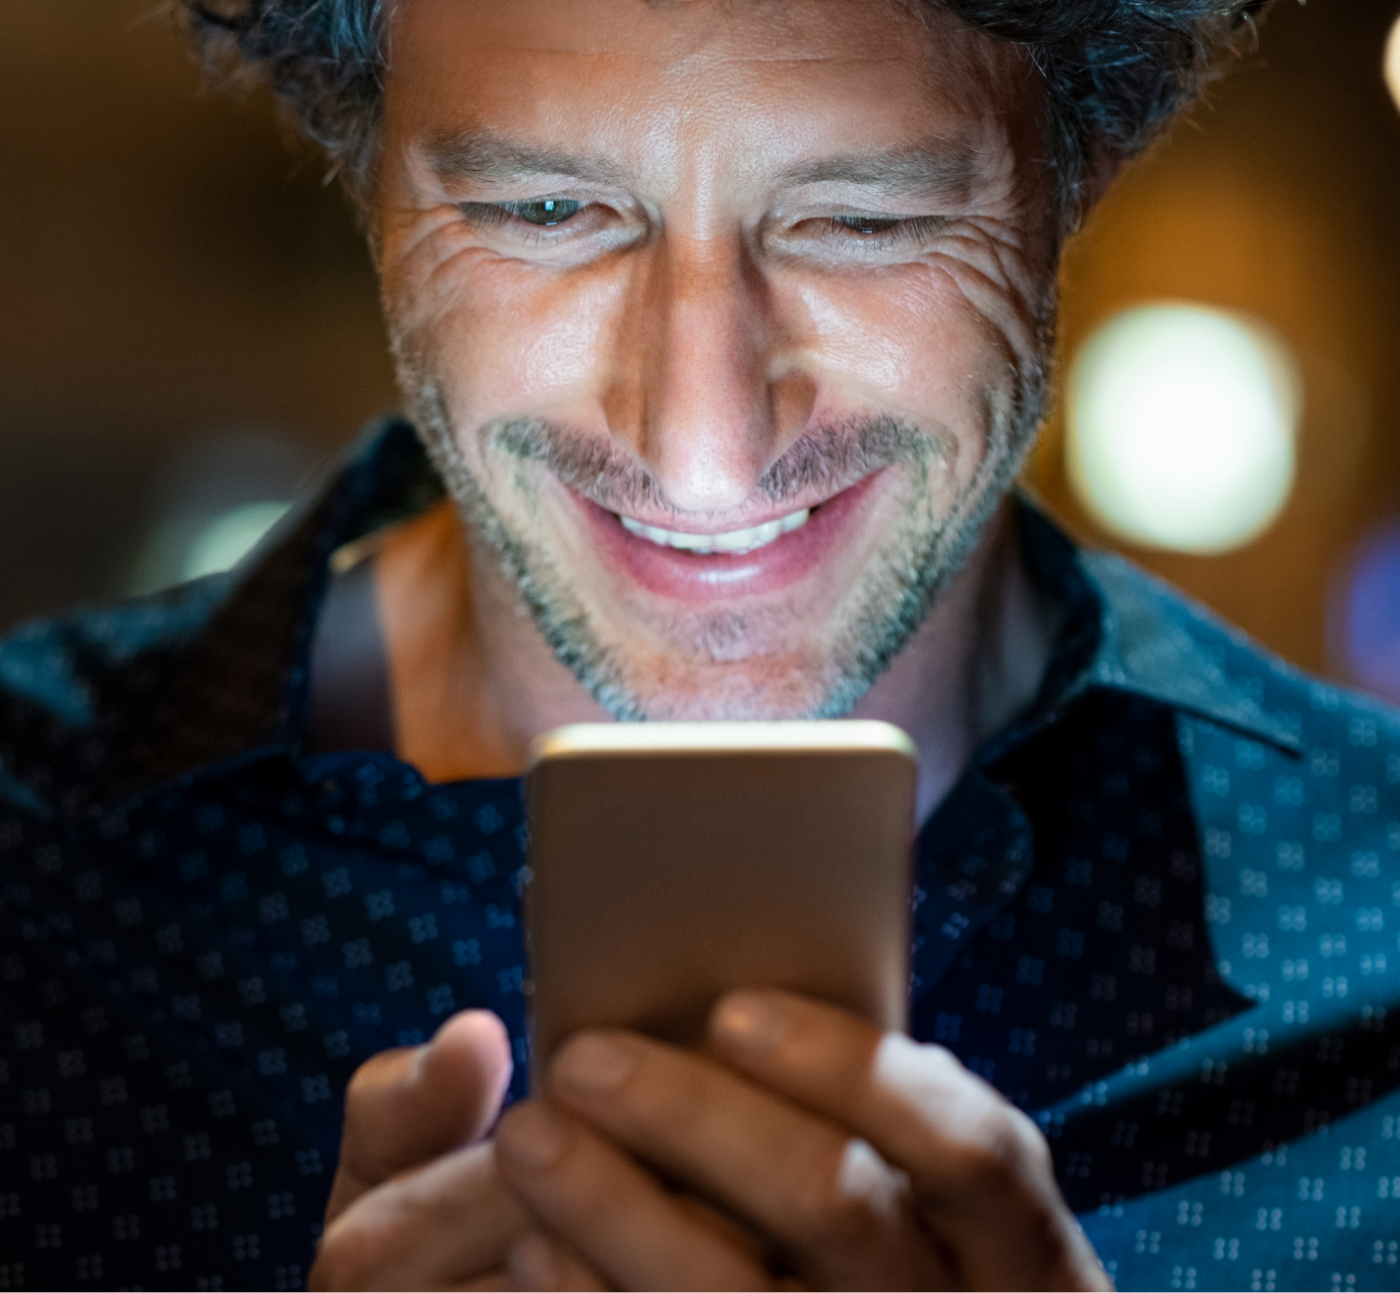 Man holding a phone and smiling at the screen which illuminates his face